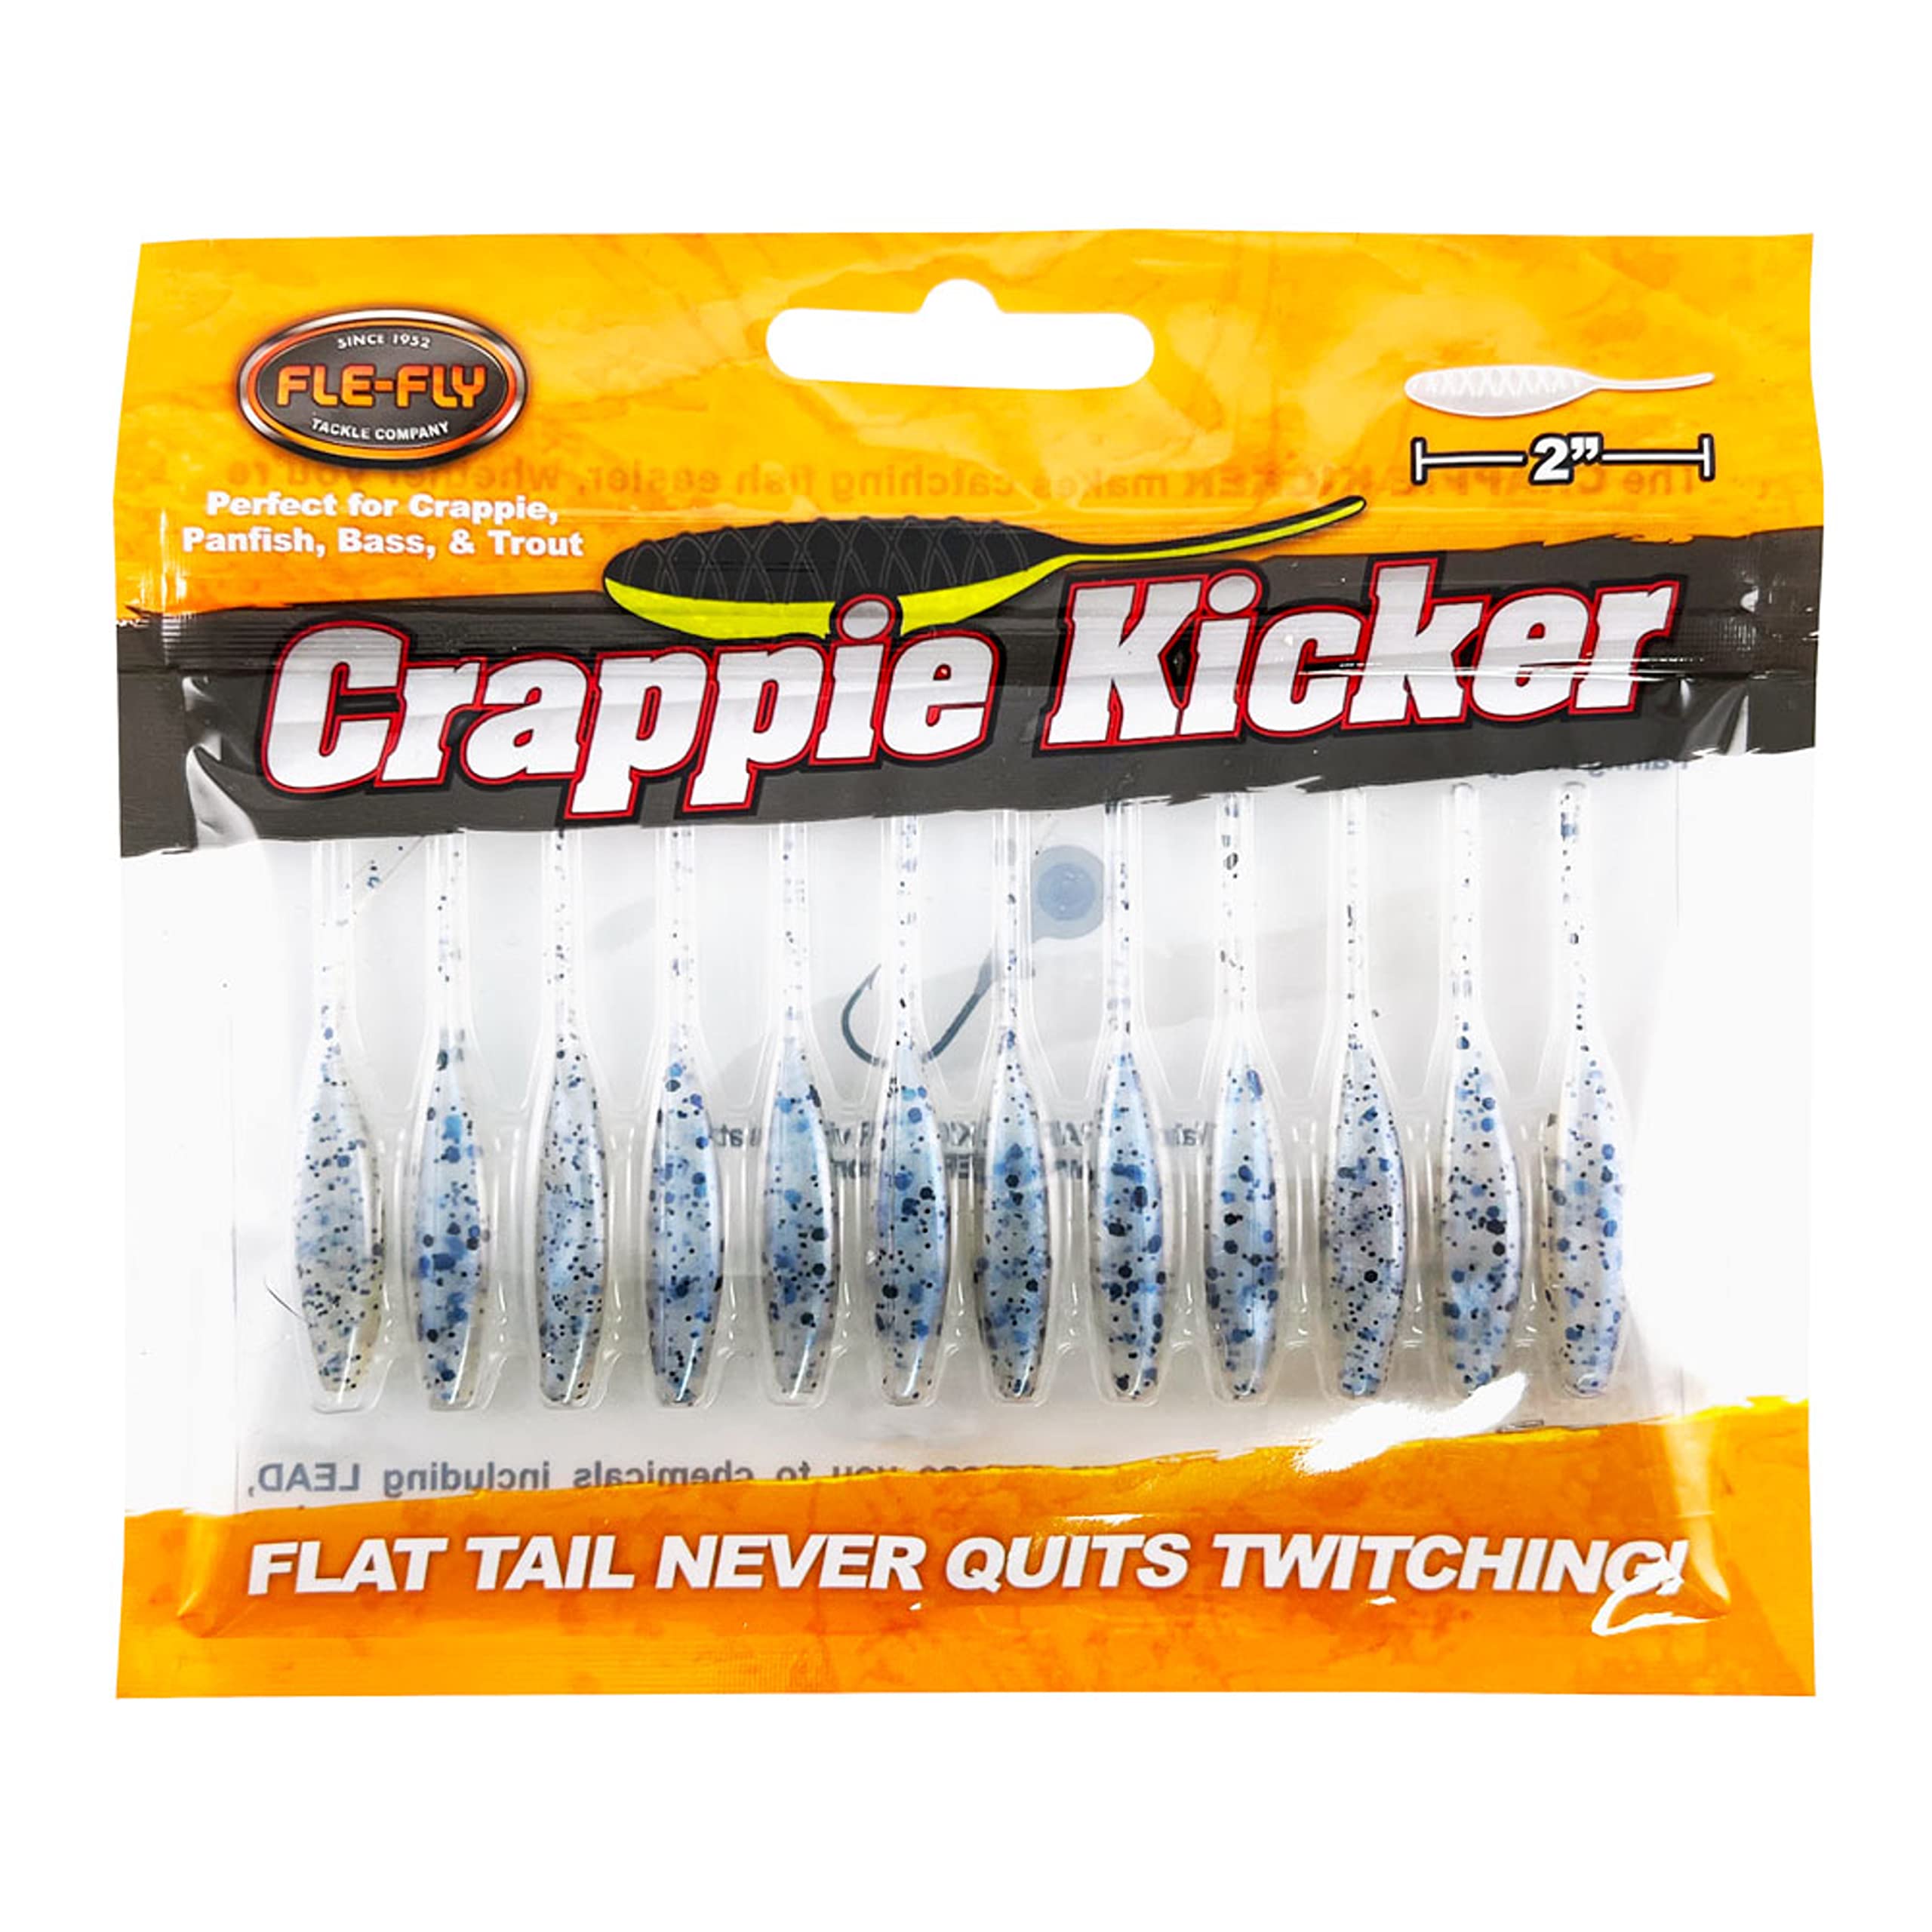 FLE-FLY Crappie Kickers Soft Plastic Baits with Thin Vibrating